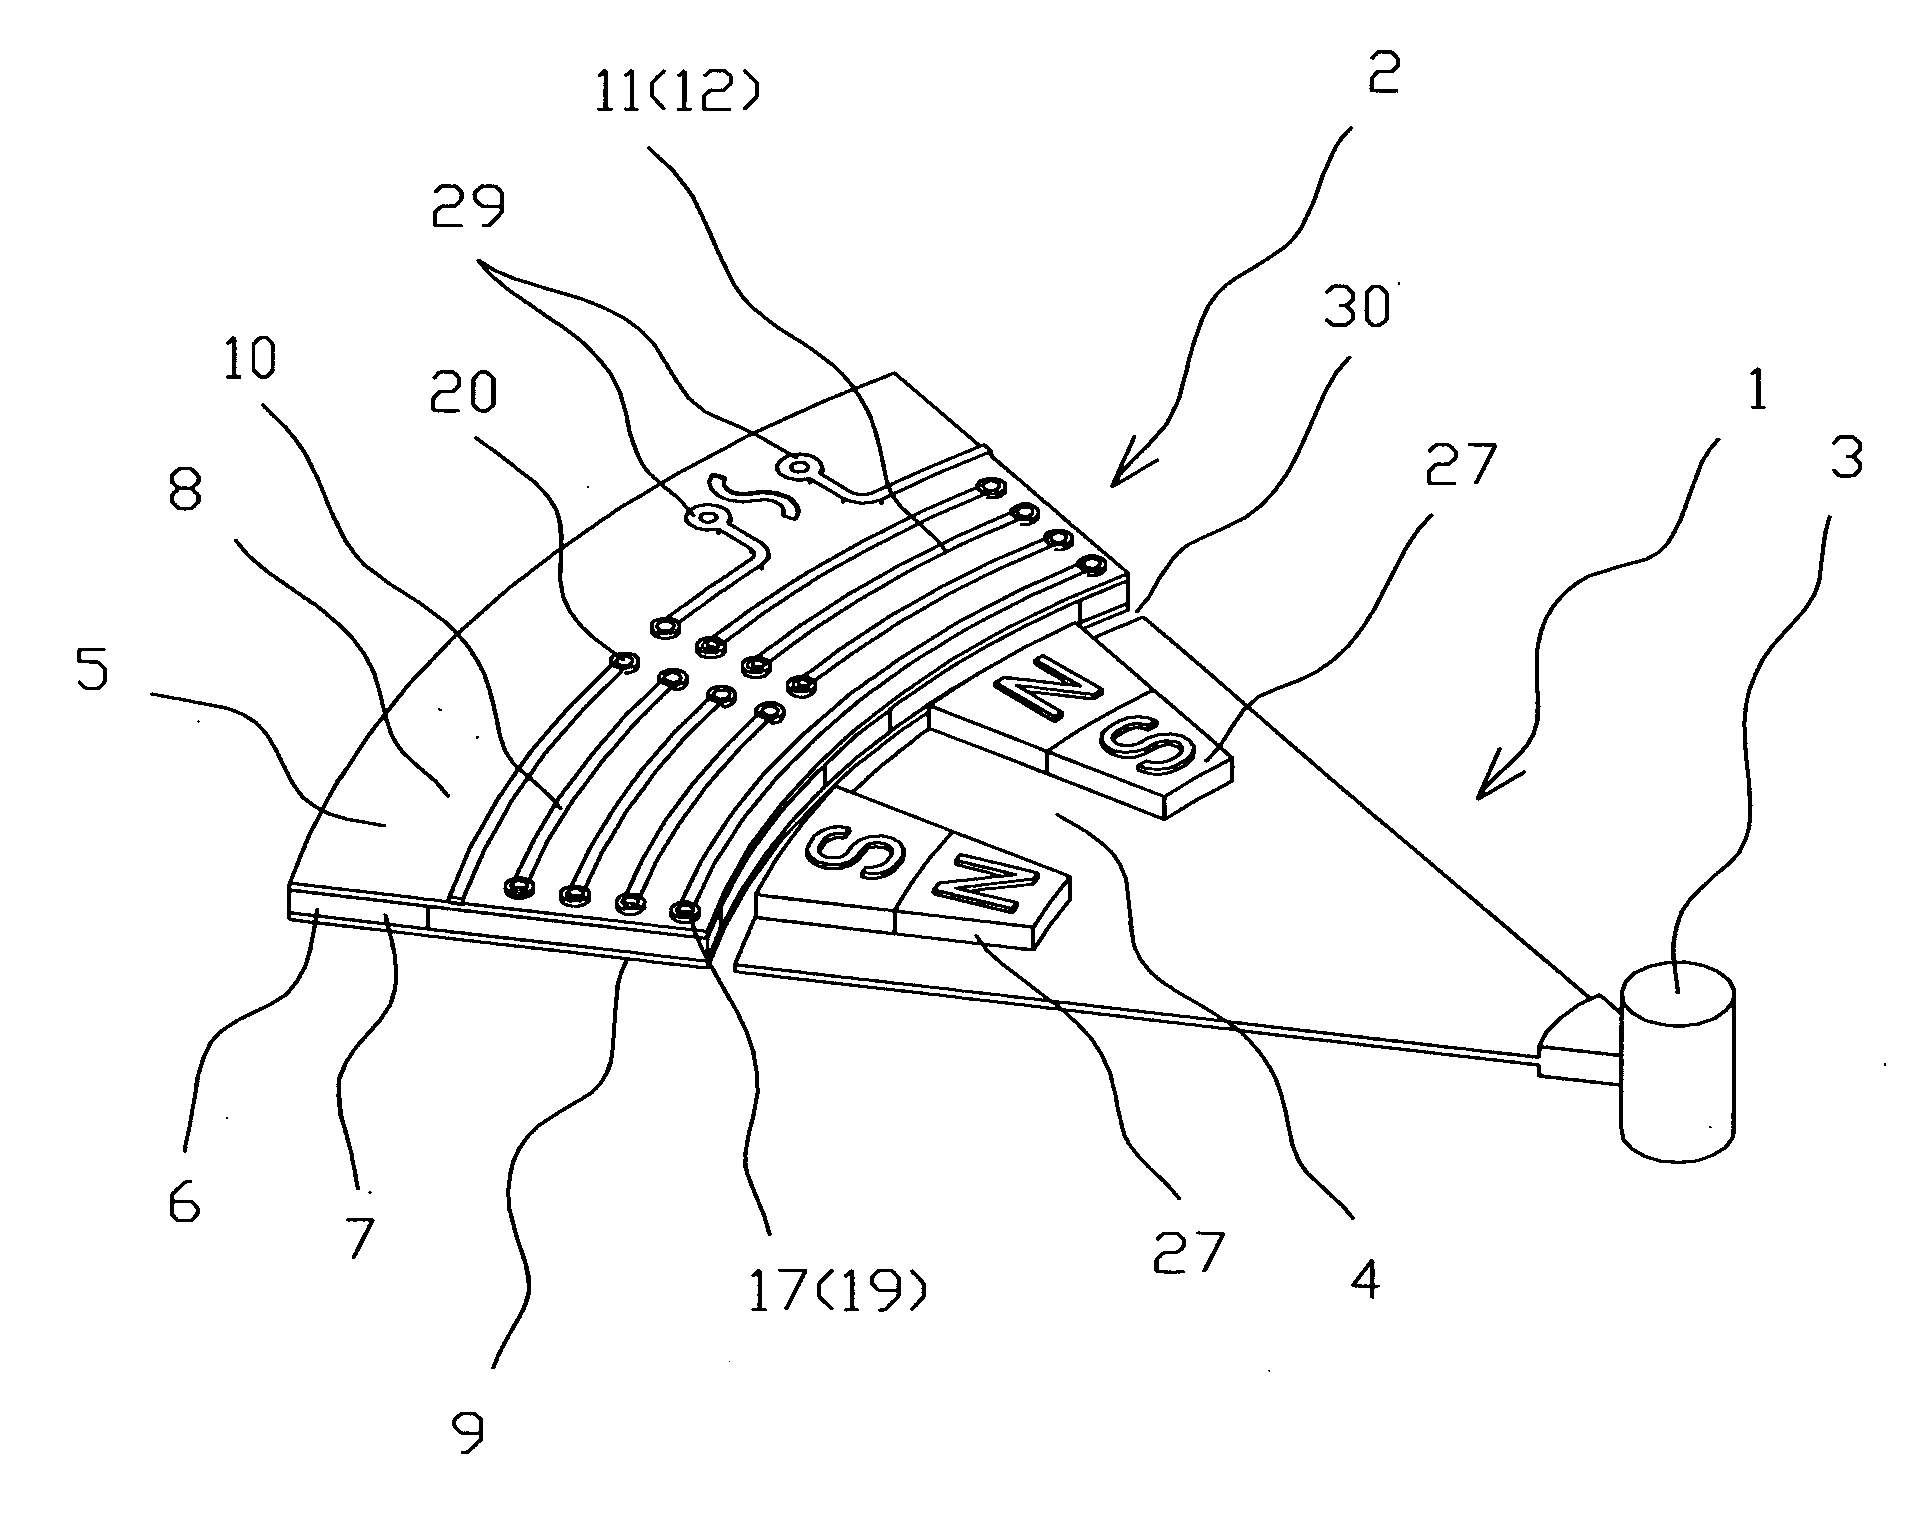 Flat radially interacting electric drive and a method of the manufacturing the same